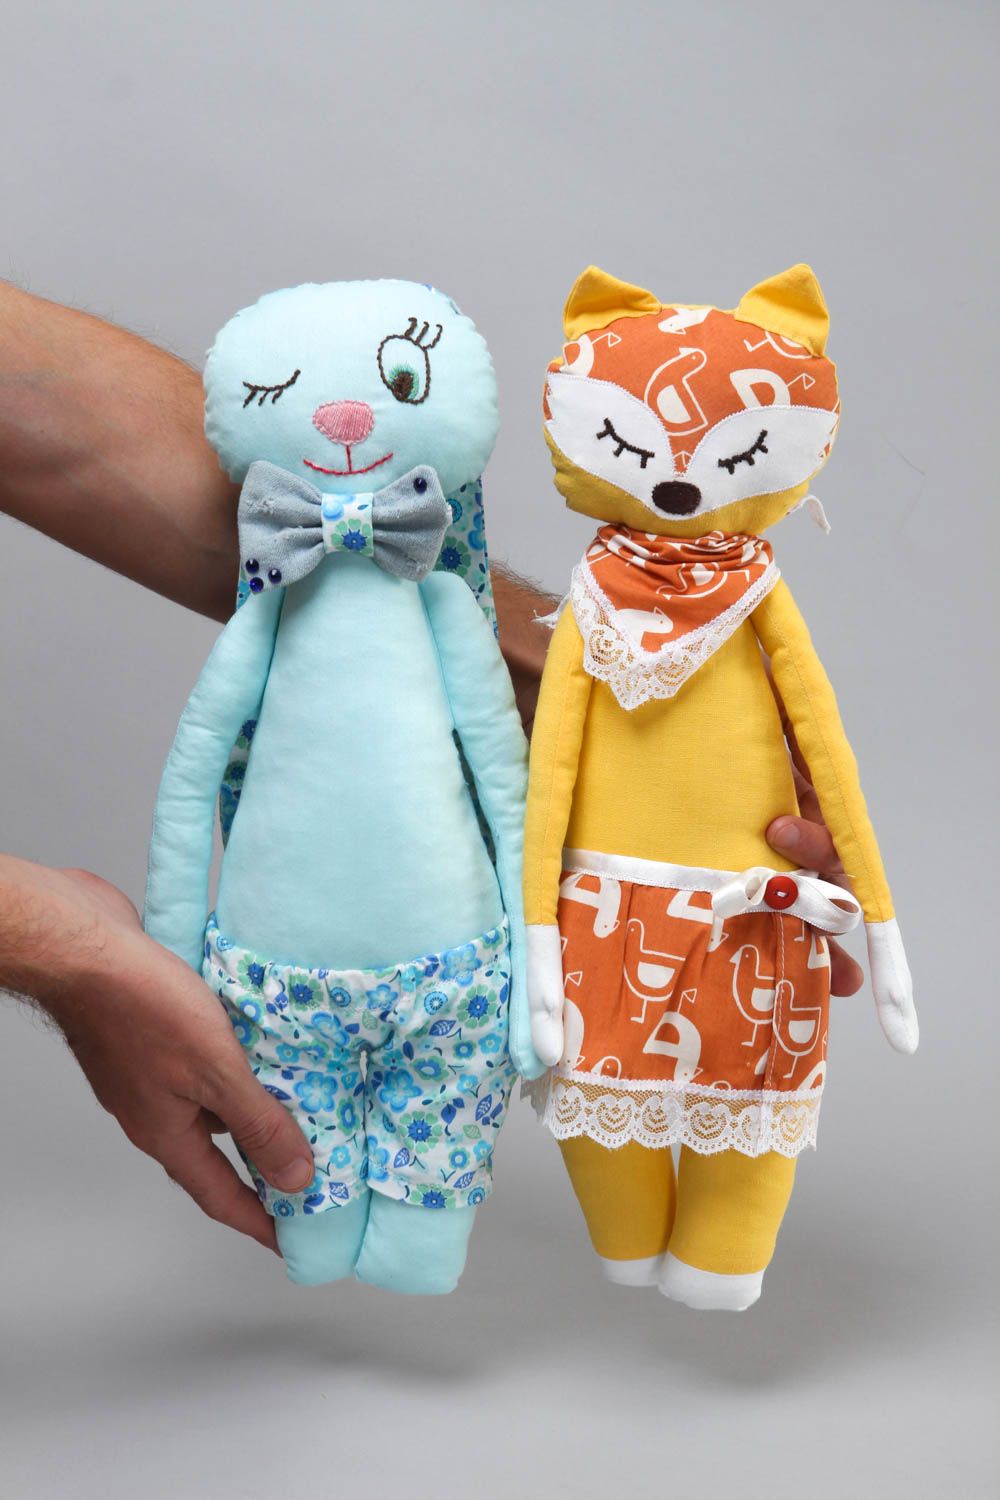 Beautiful handmade soft toy childrens toys 2 pieces birthday gift ideas photo 5